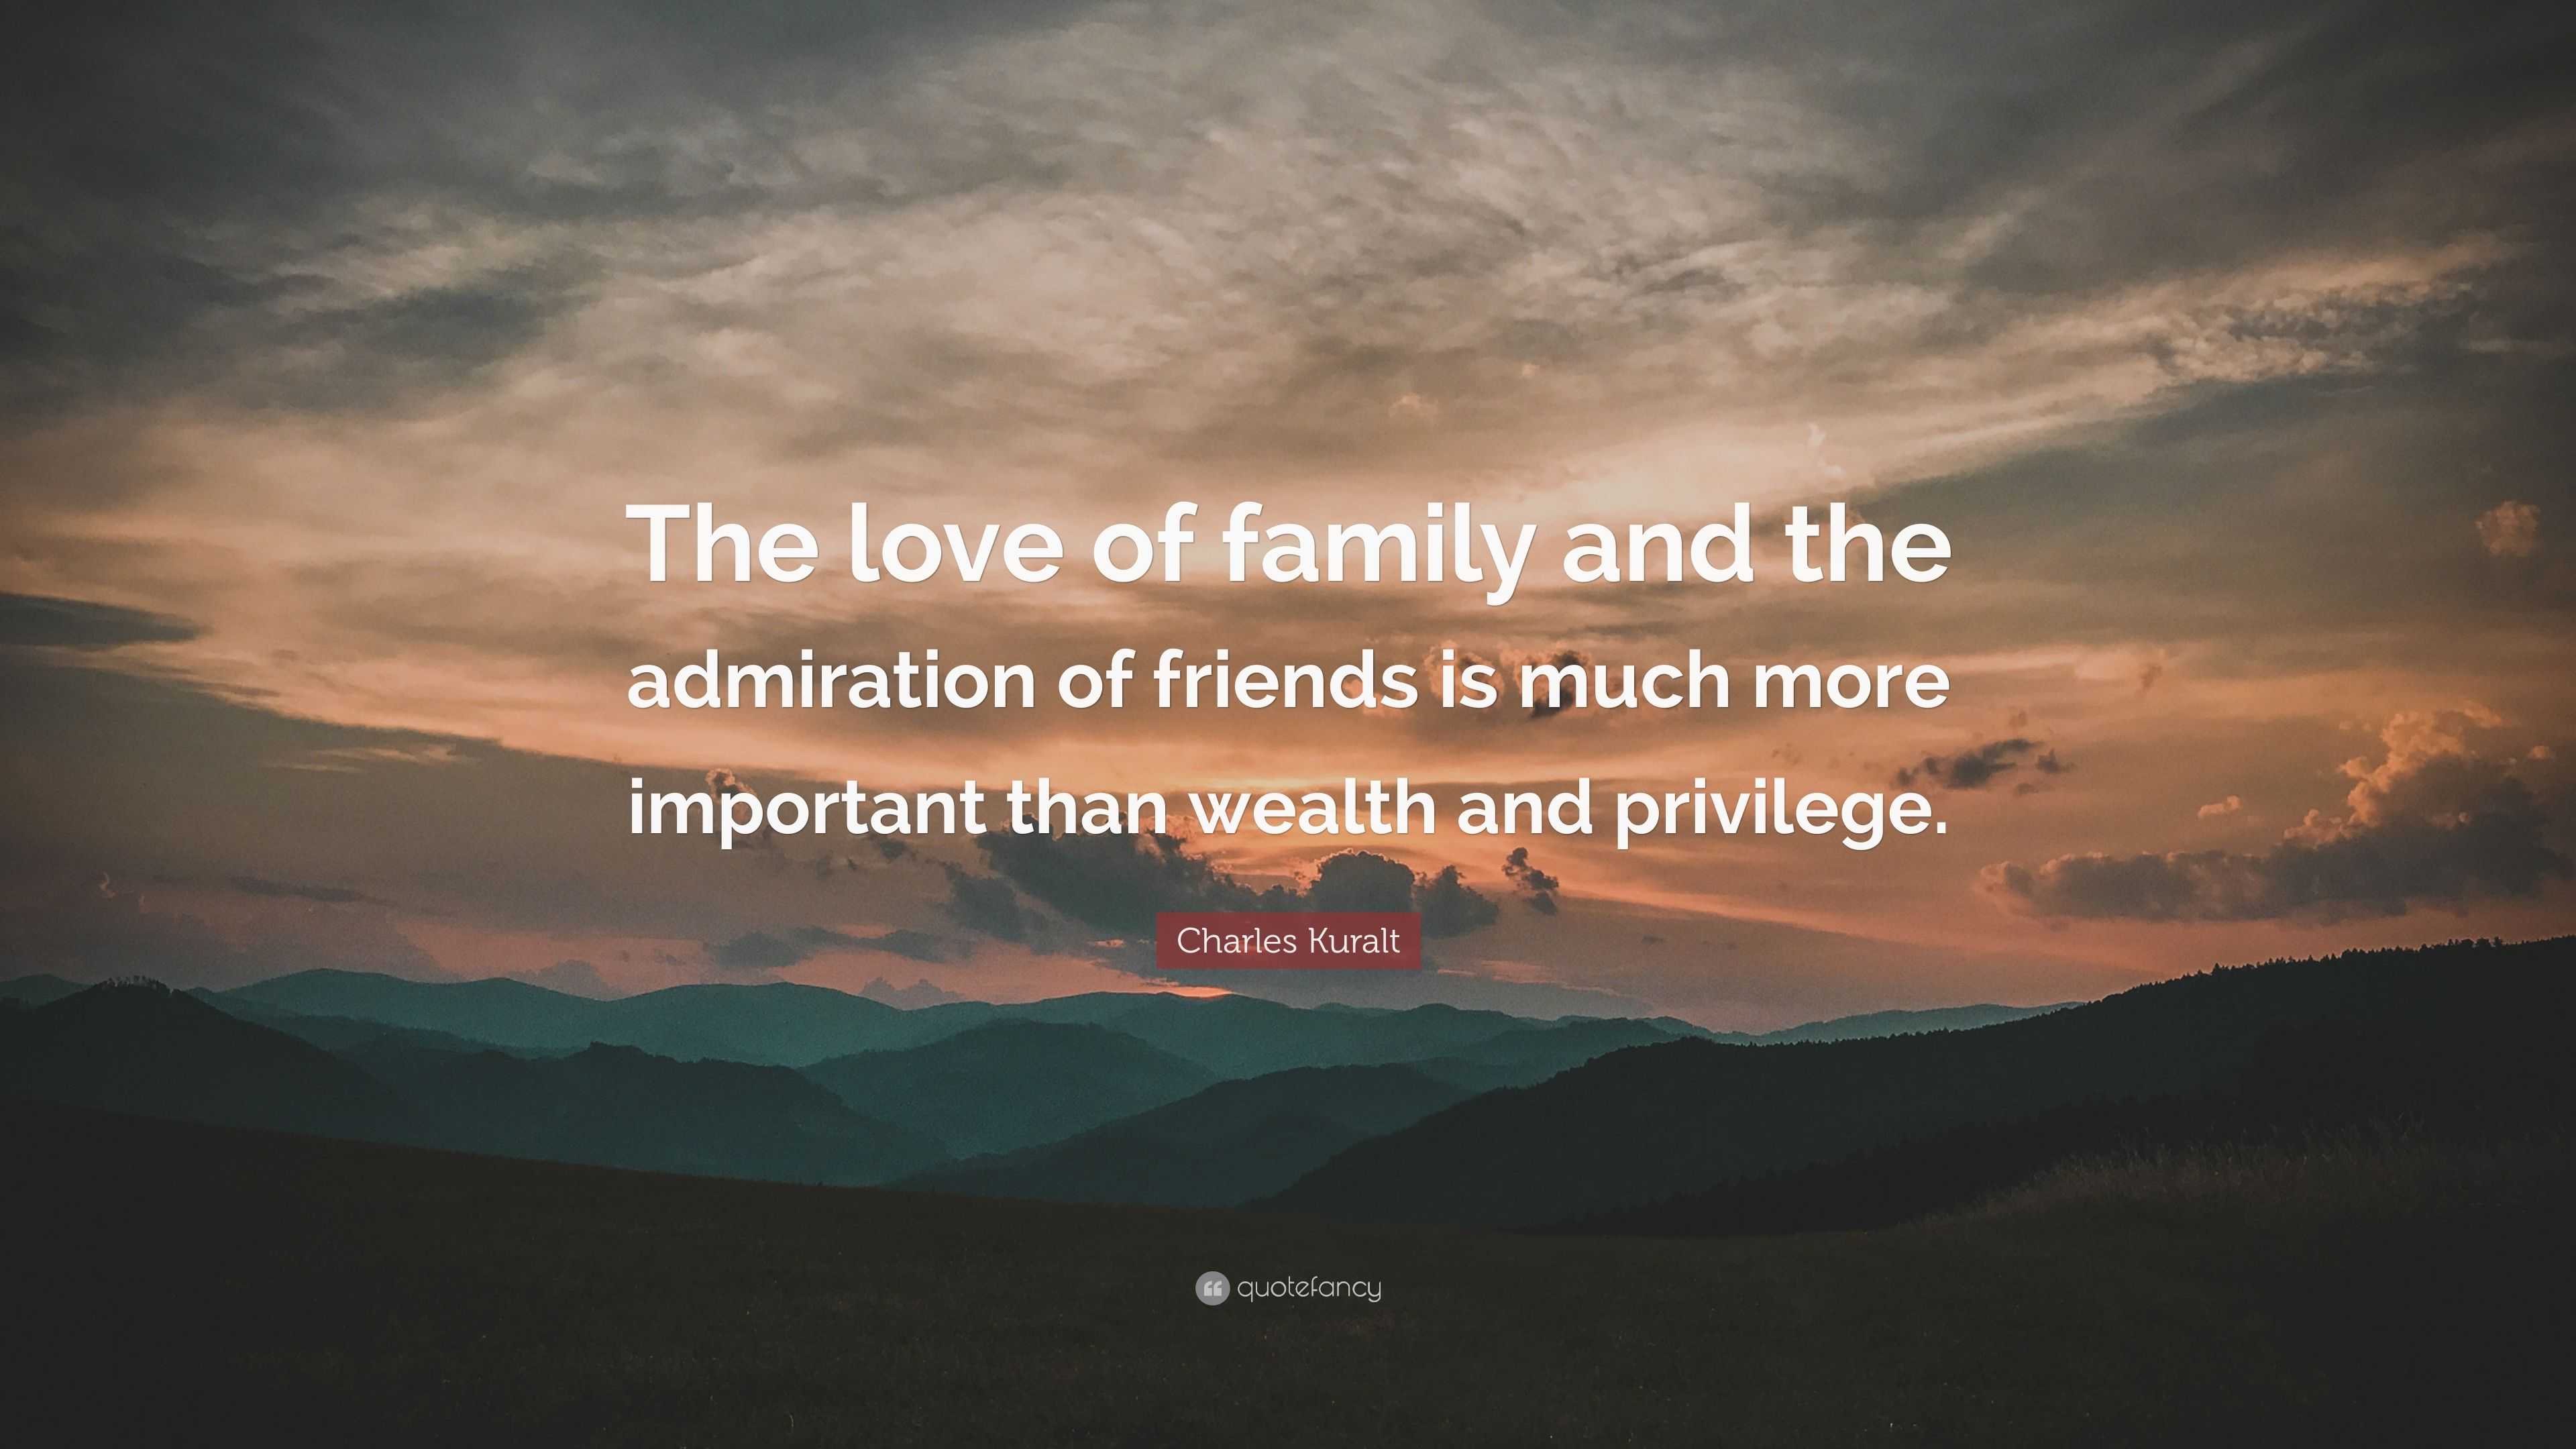 The love of #family and the admiration of friends is much more